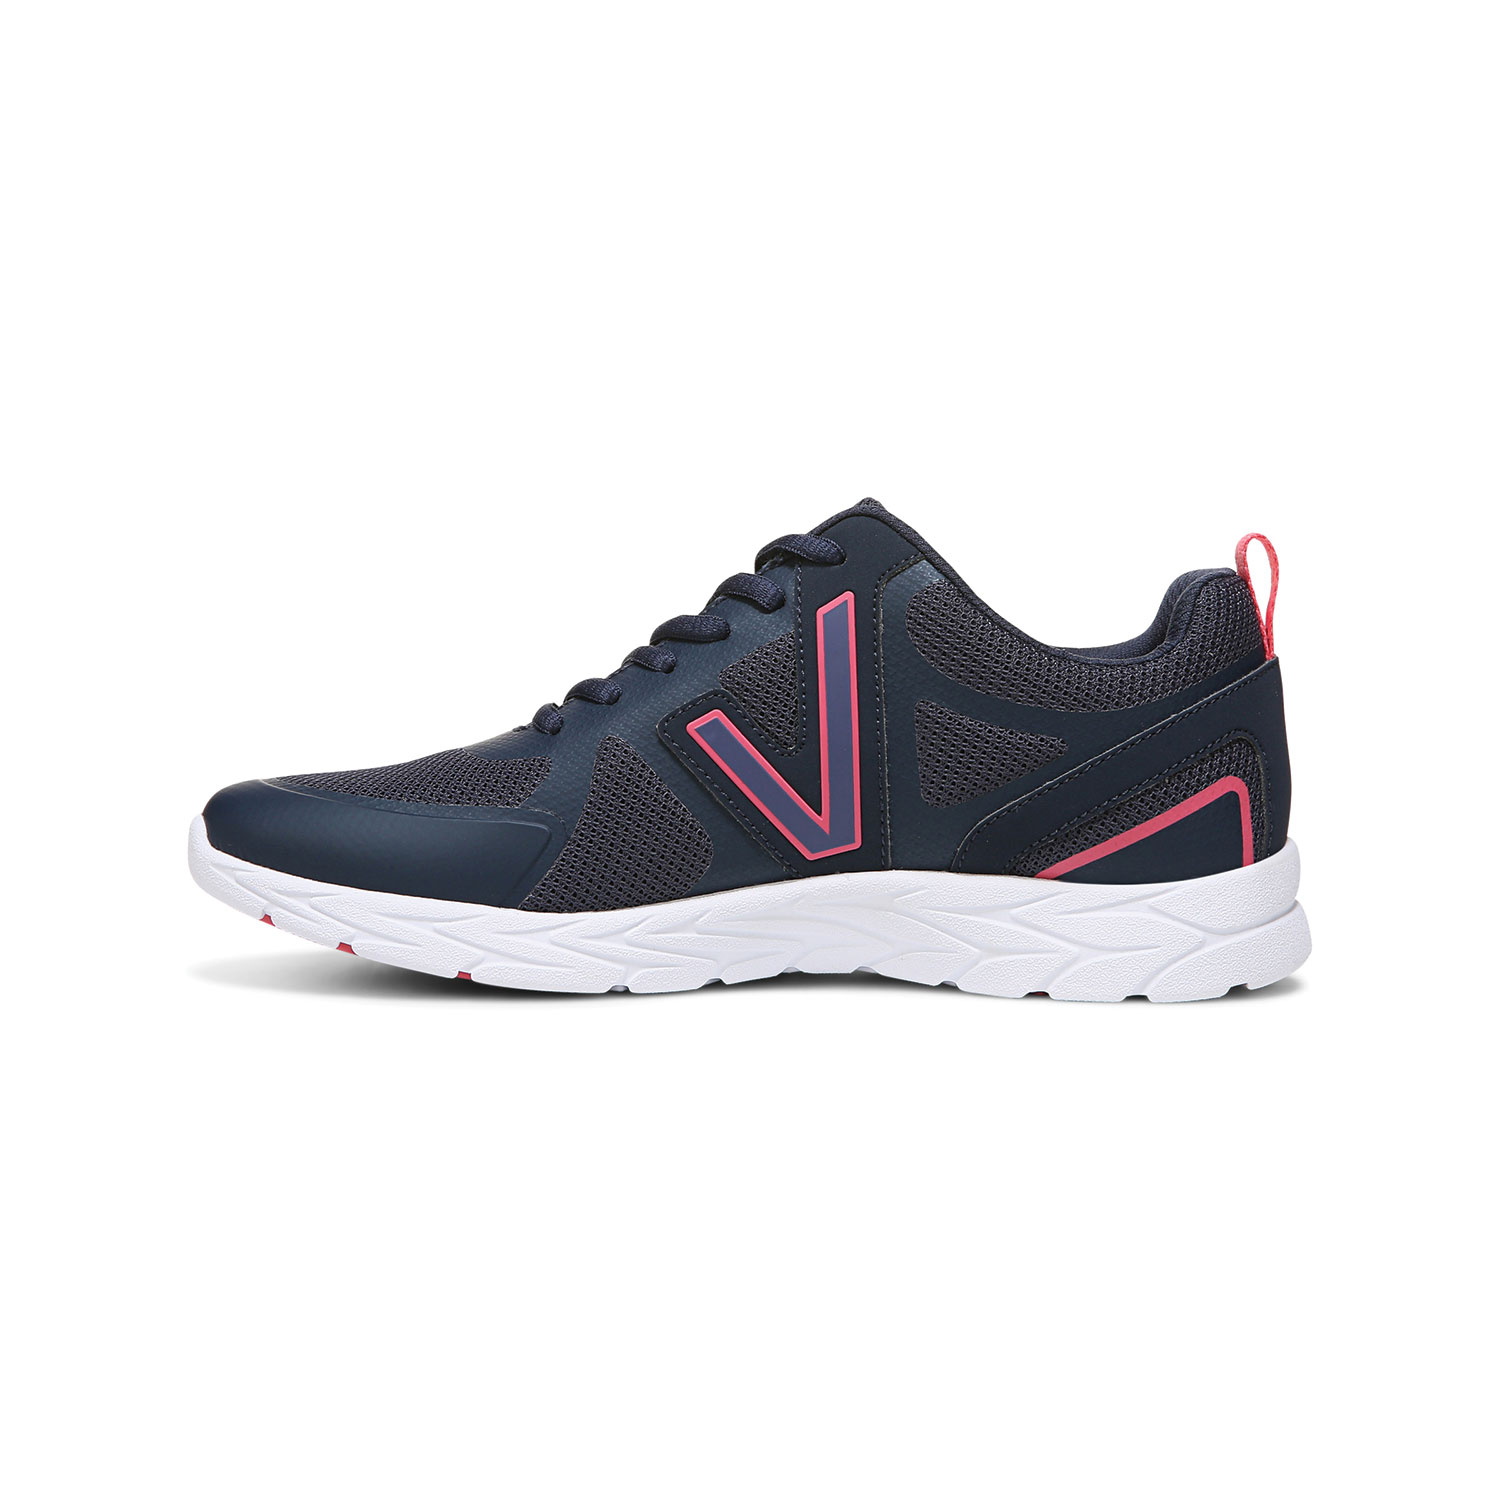 Vionic Miles II Shoes | Support Plus